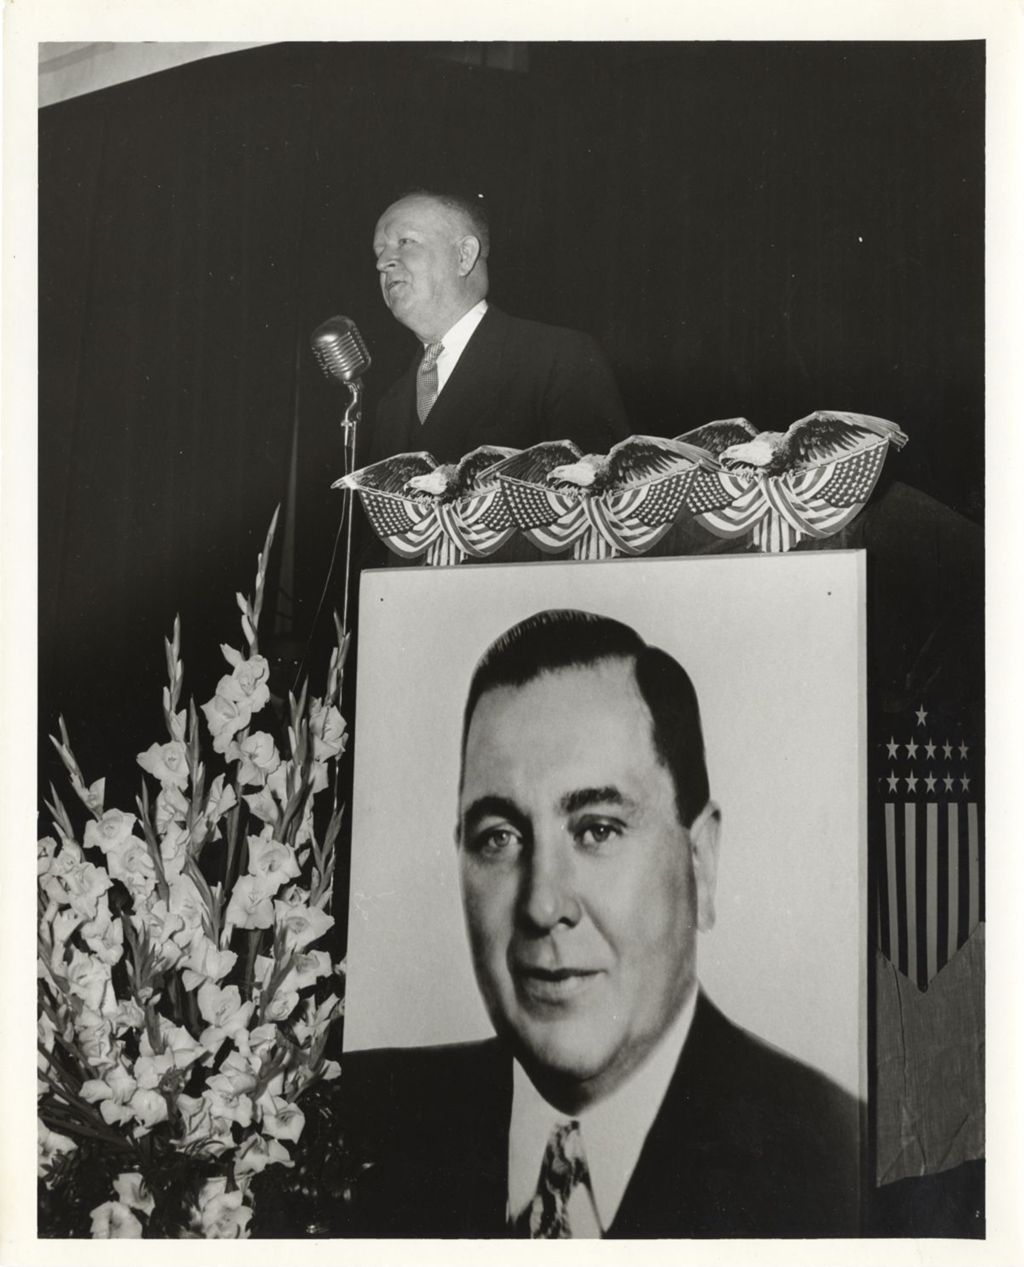 Miniature of John McGuane speaking at Daley campaign event